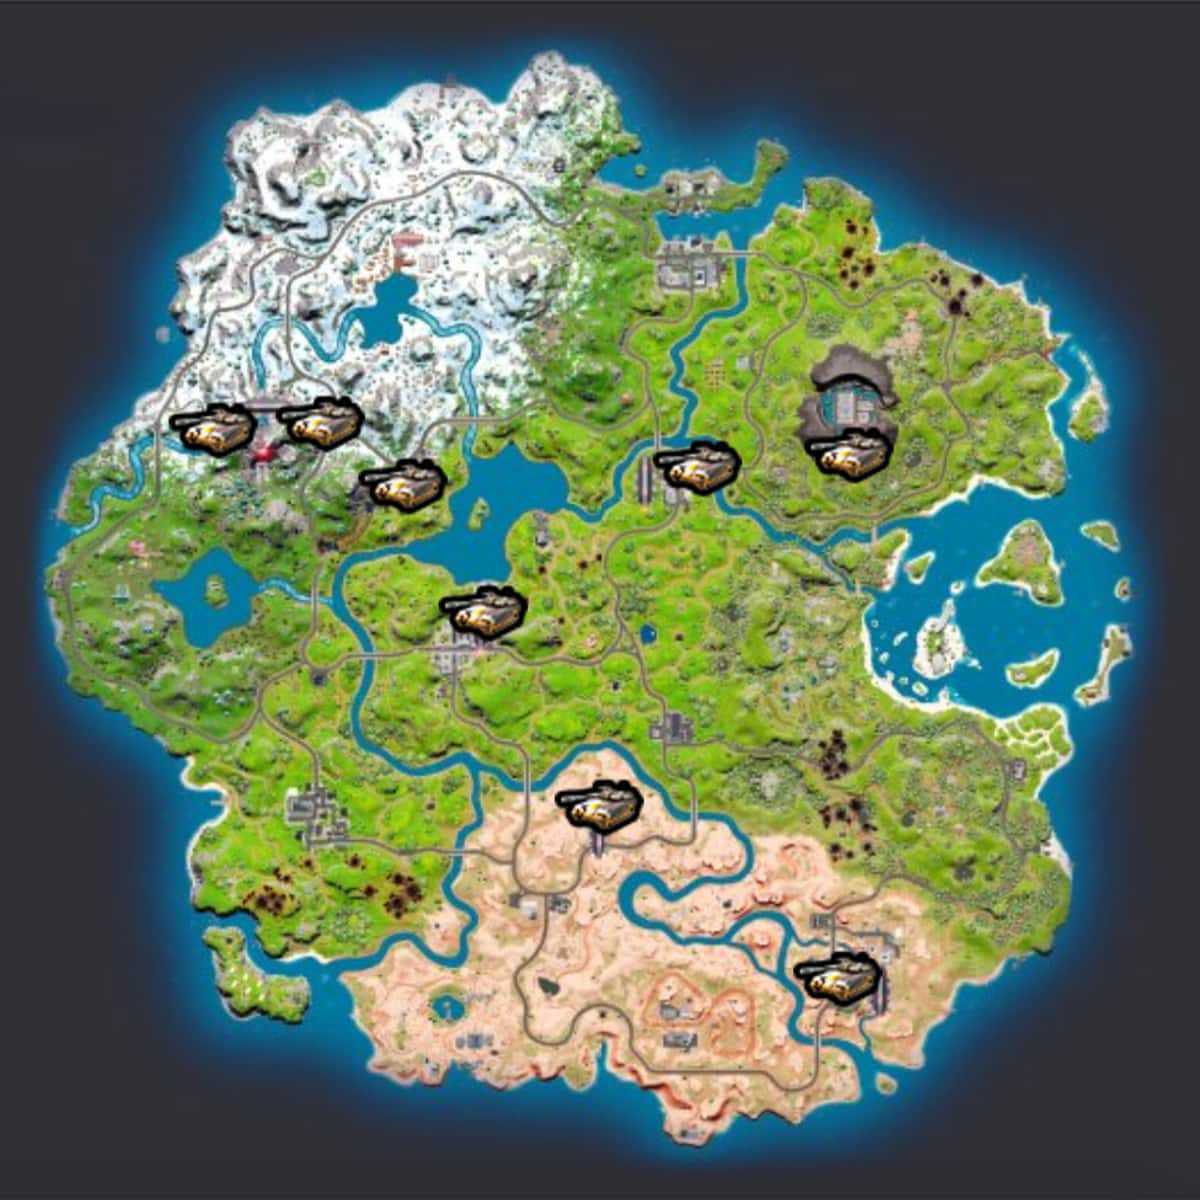 All tank locations marked on the Fortnite map